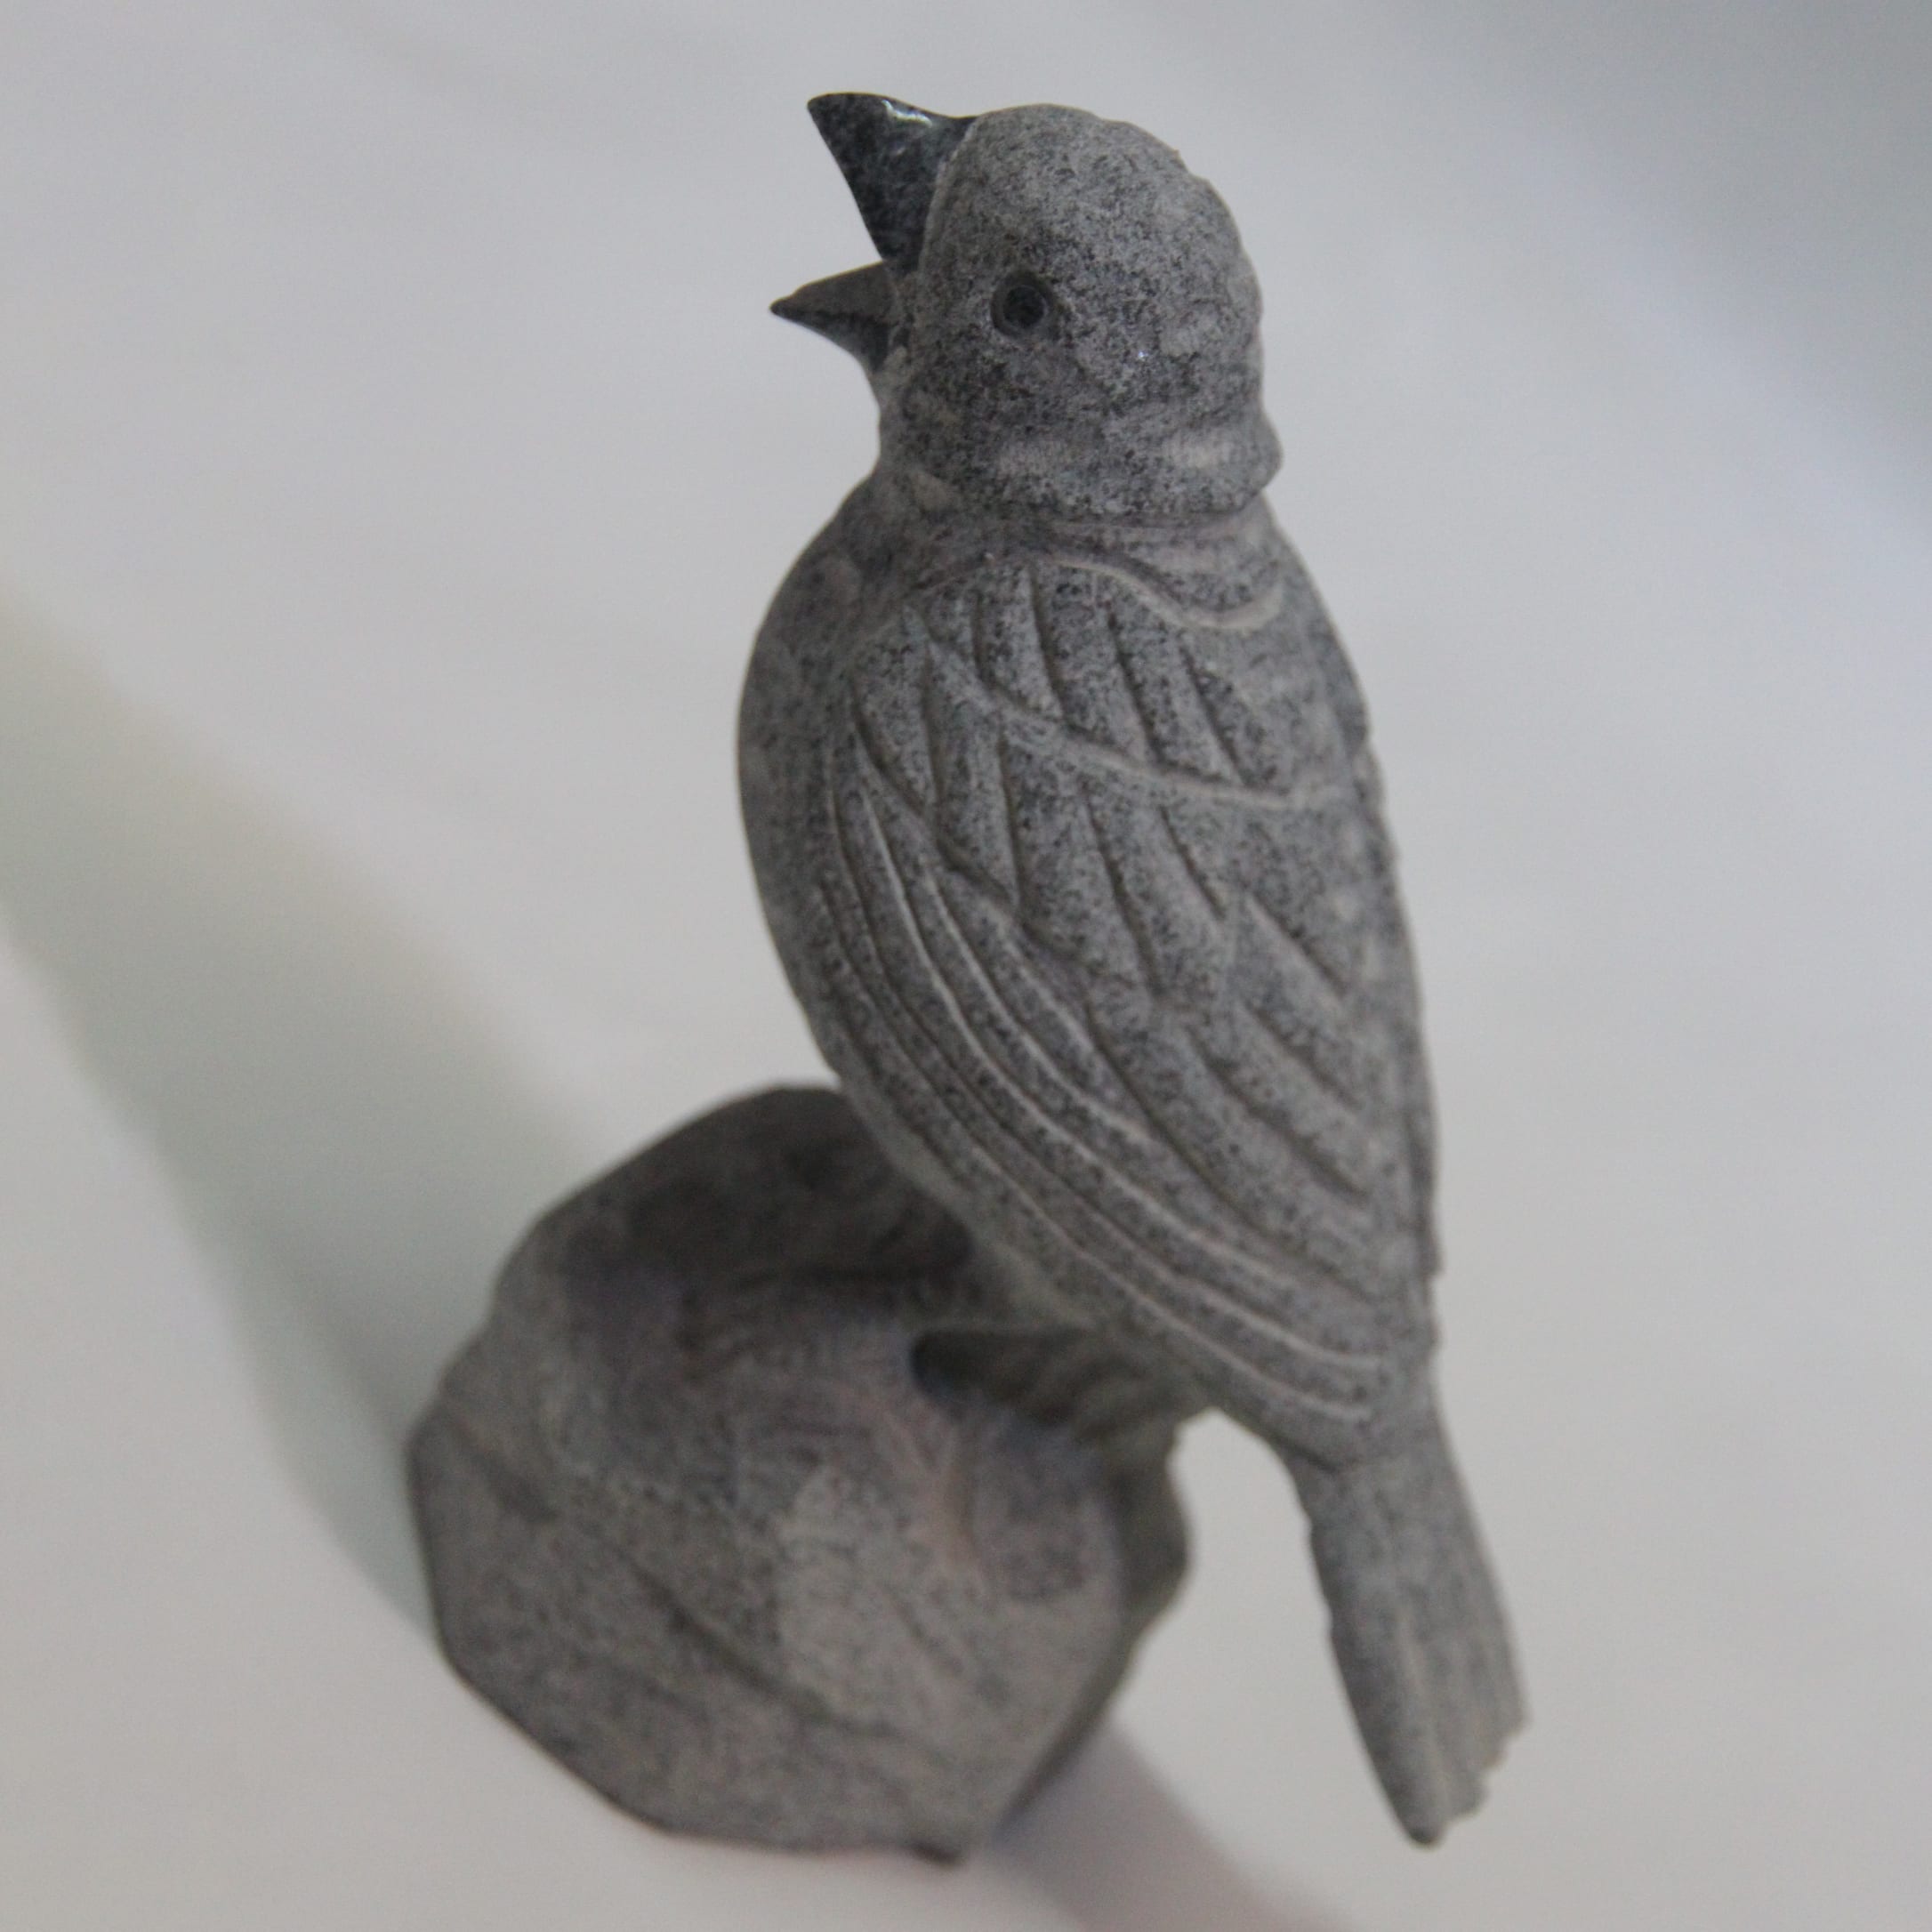 Stone bird carving sculpture for sale Featured Image